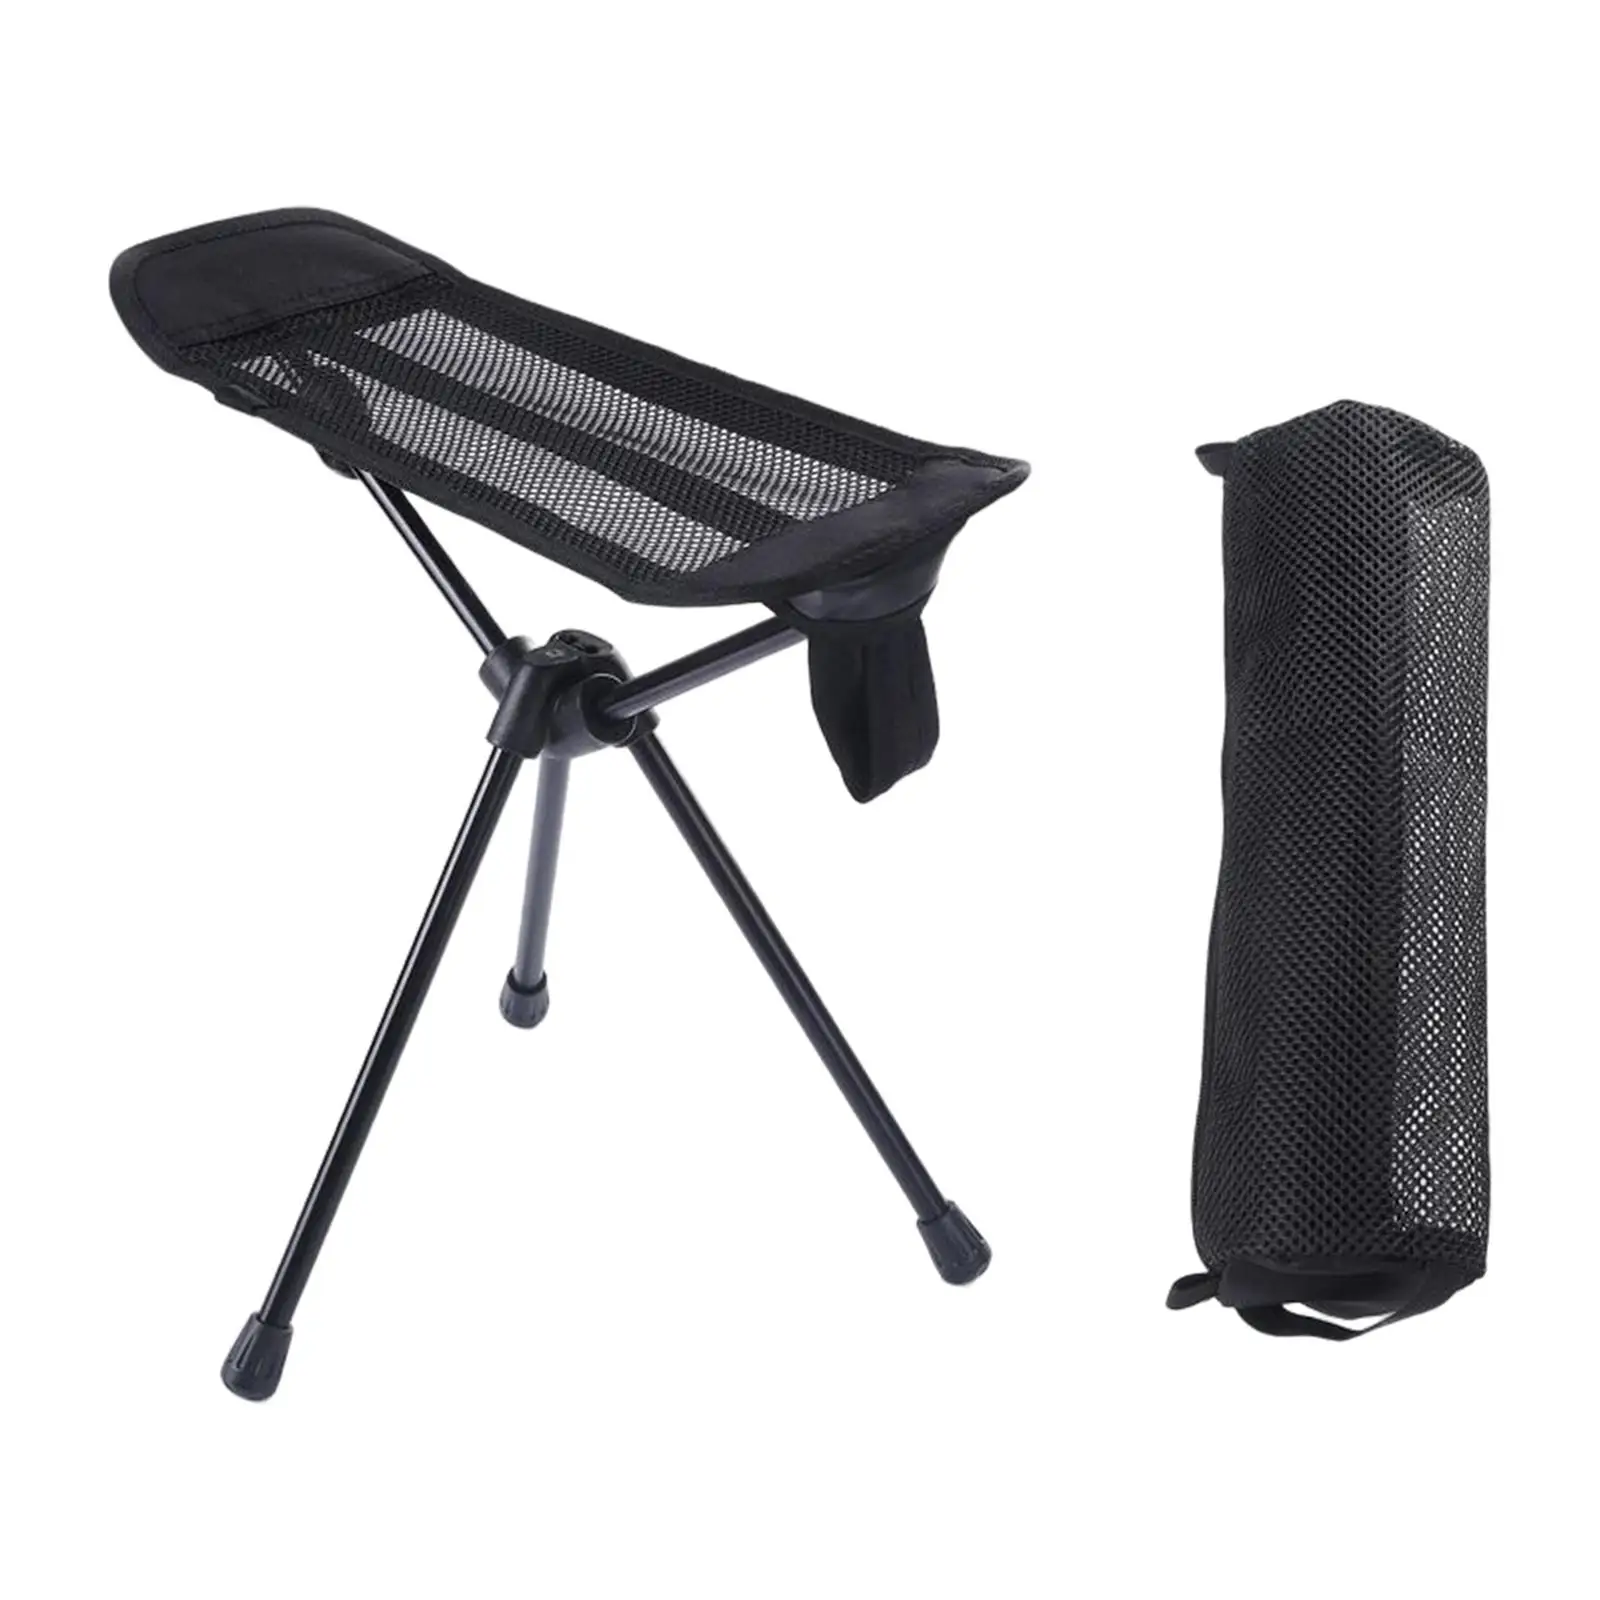 Portable Stool Collapsible Footstool For Travel Beach Folding Chair Fishing Outdoor BBQ Camping Chair Recliner Foot Rest